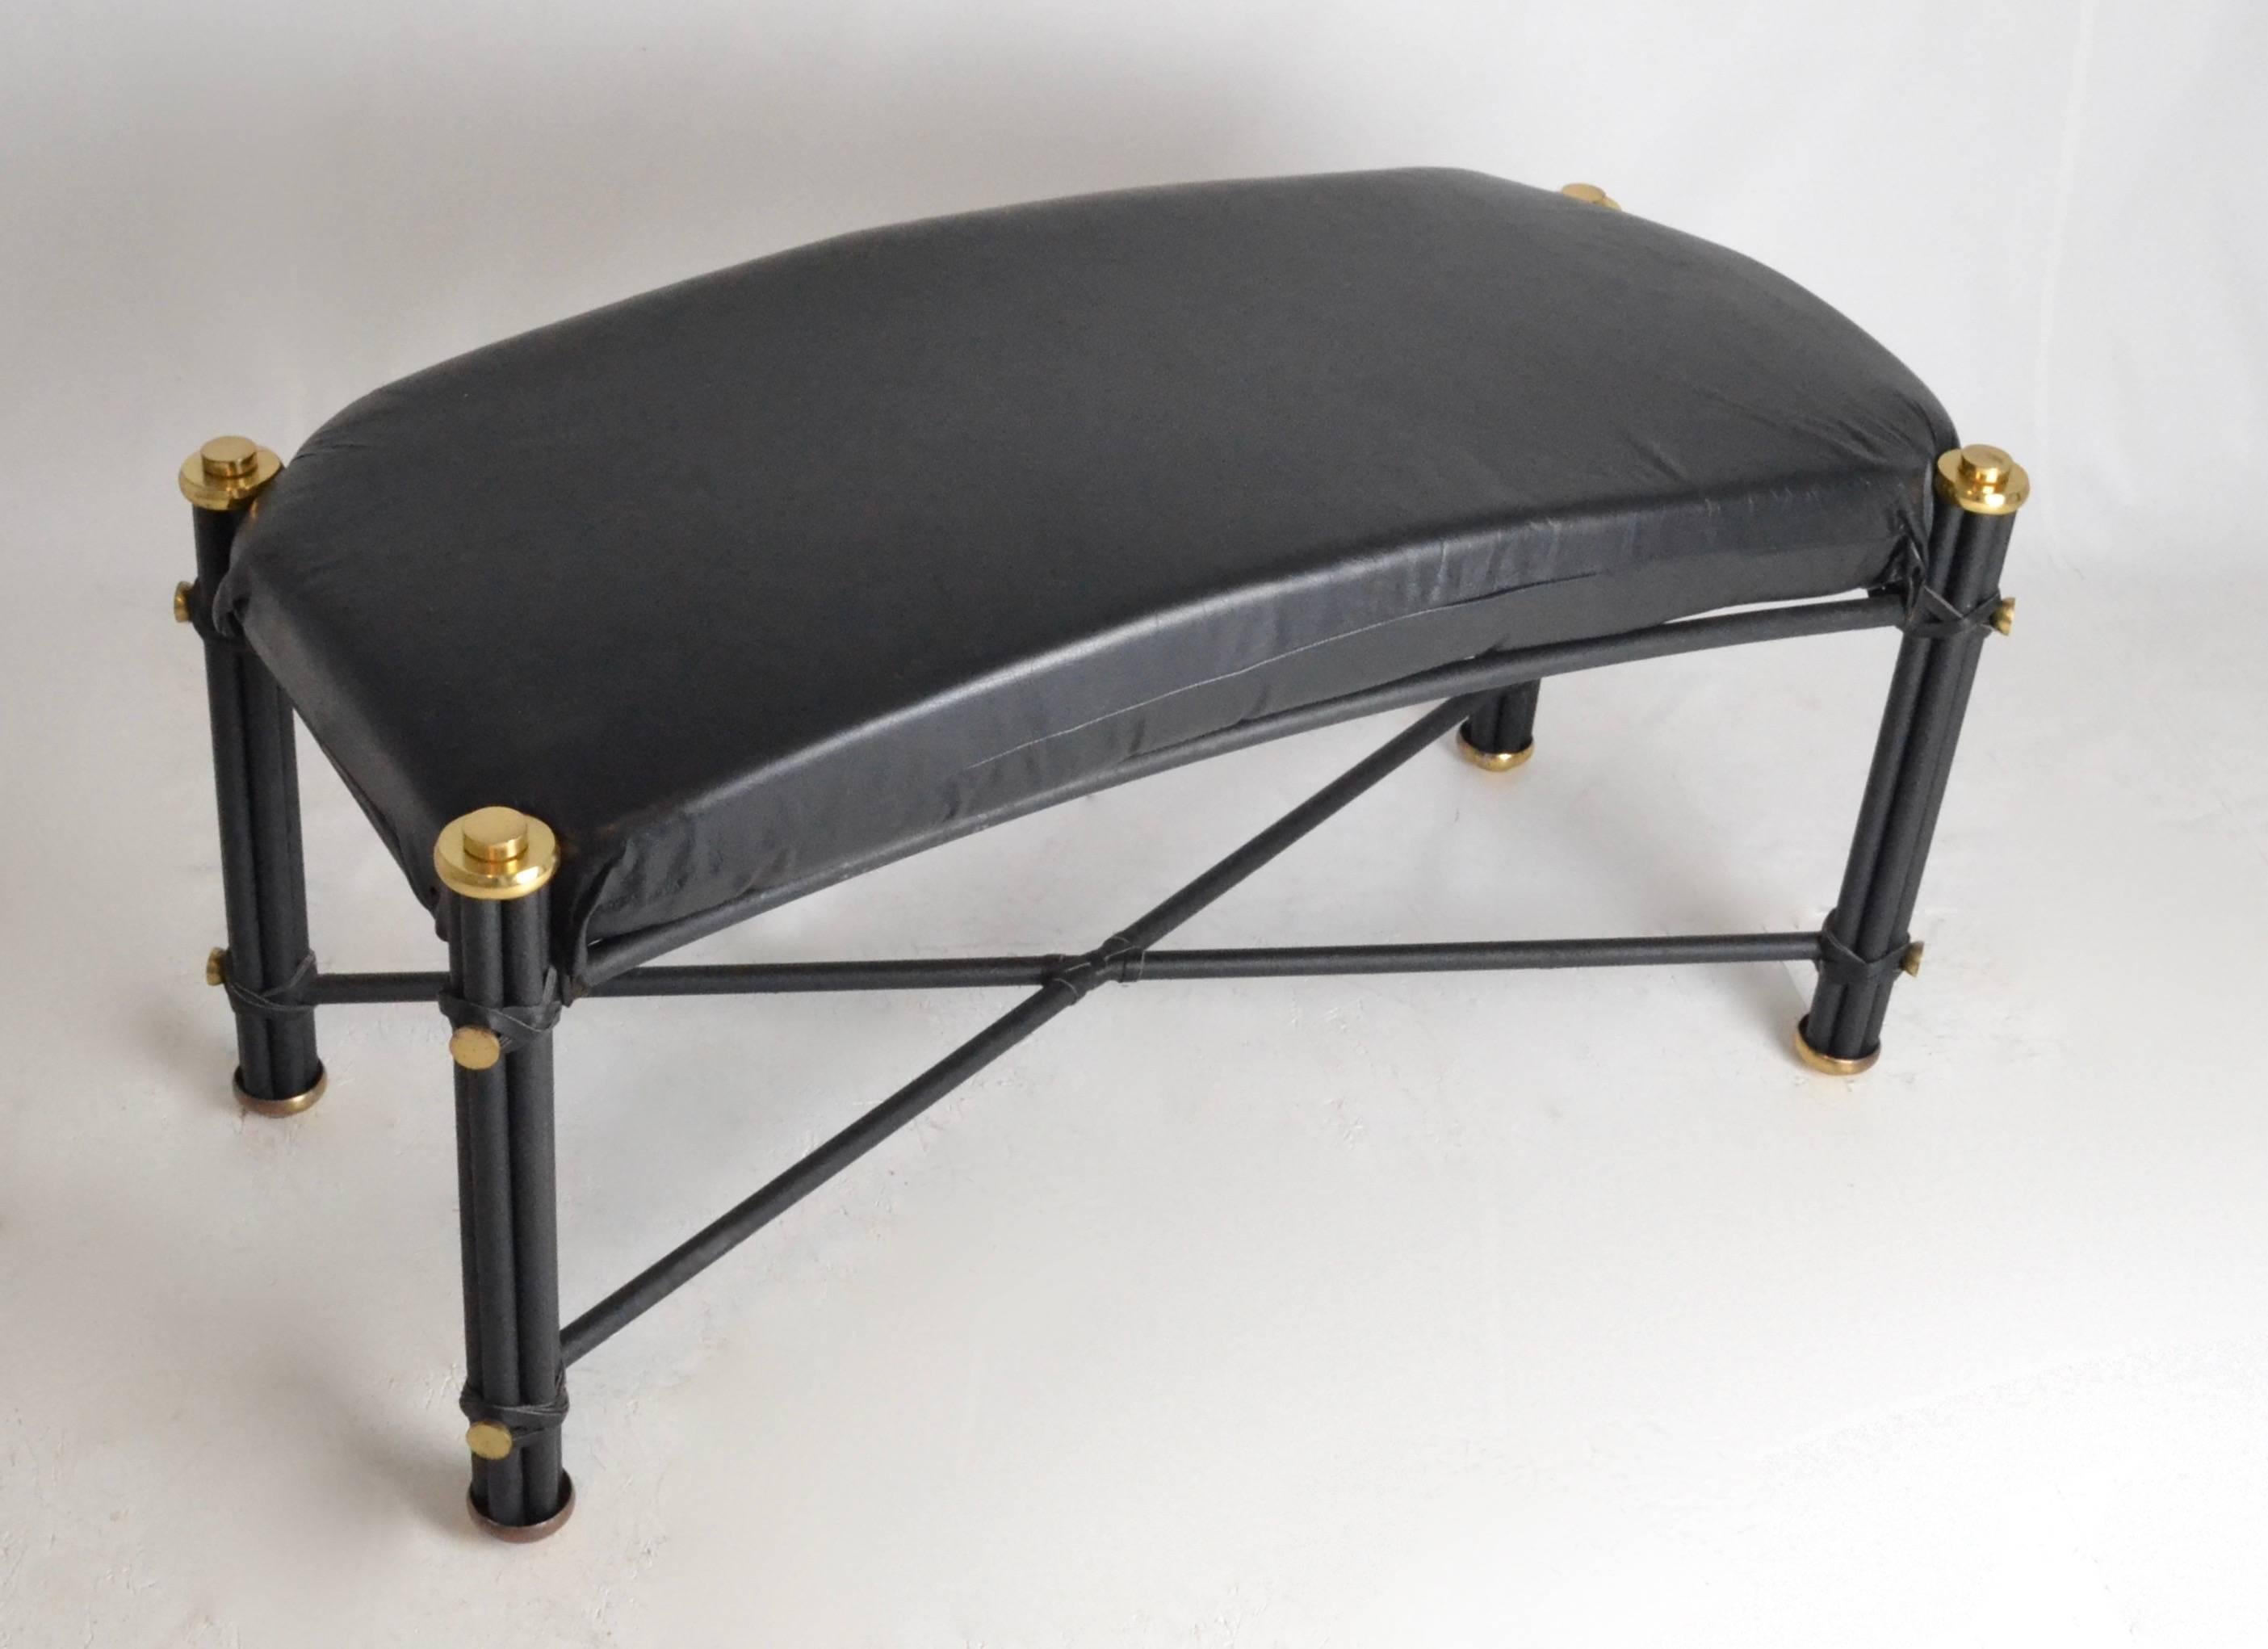 Quality construction and great attention to design, an iron bench with black textured finish. Wrapped leather thong details along with polished brass. Leather covered seat cushion.